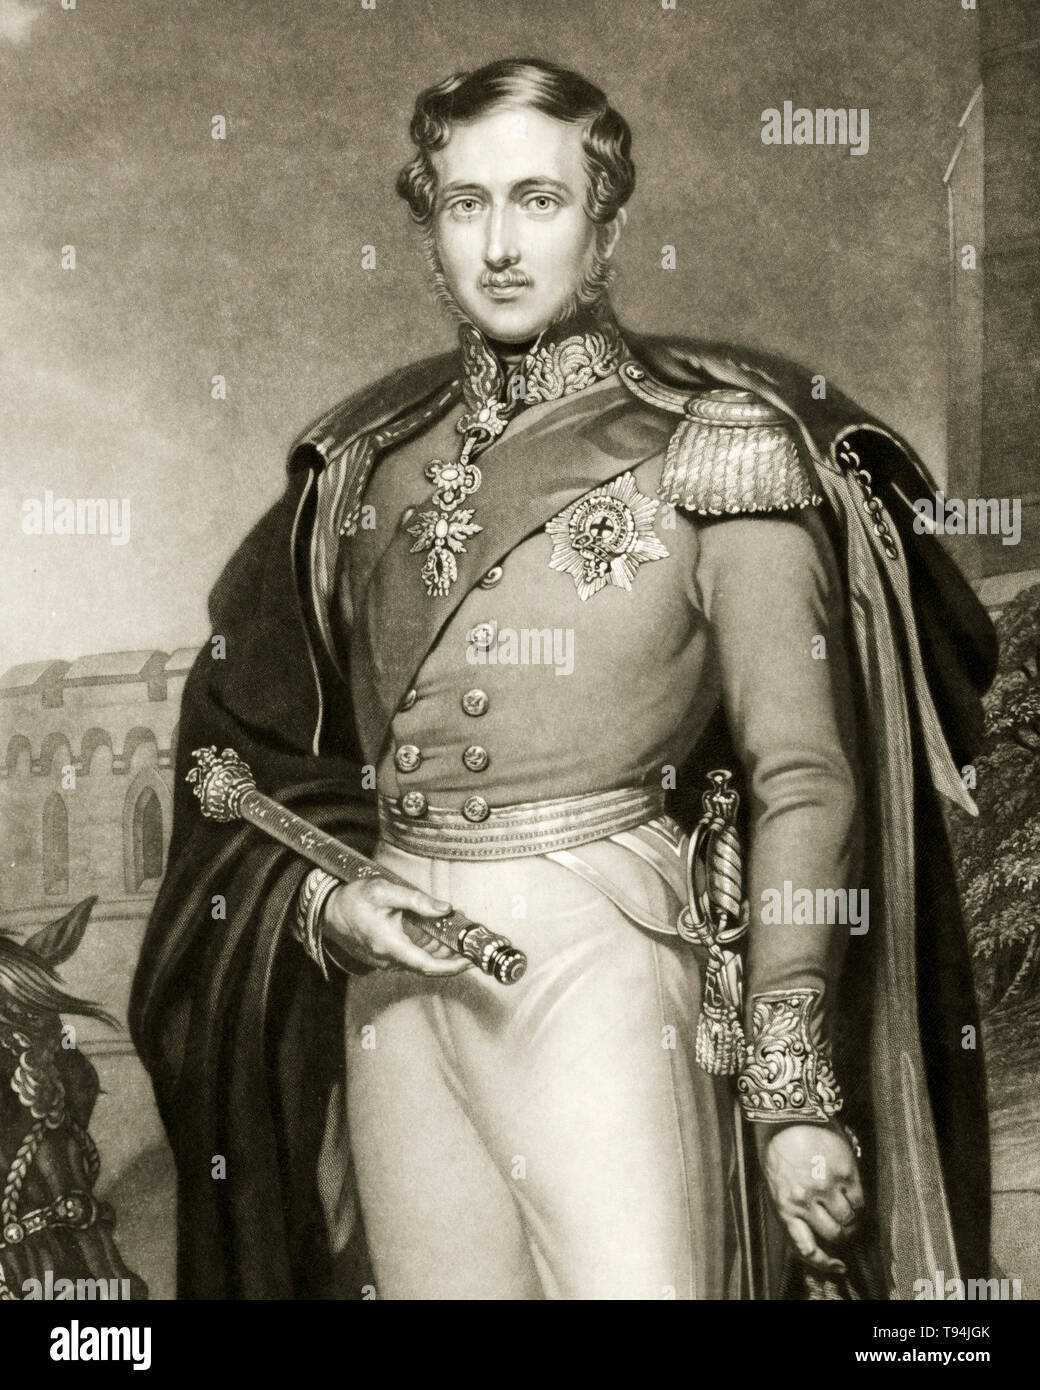 Prince Albert, portrait engraving, holding scepter and hat, military uniform,  1847 Stock Photo